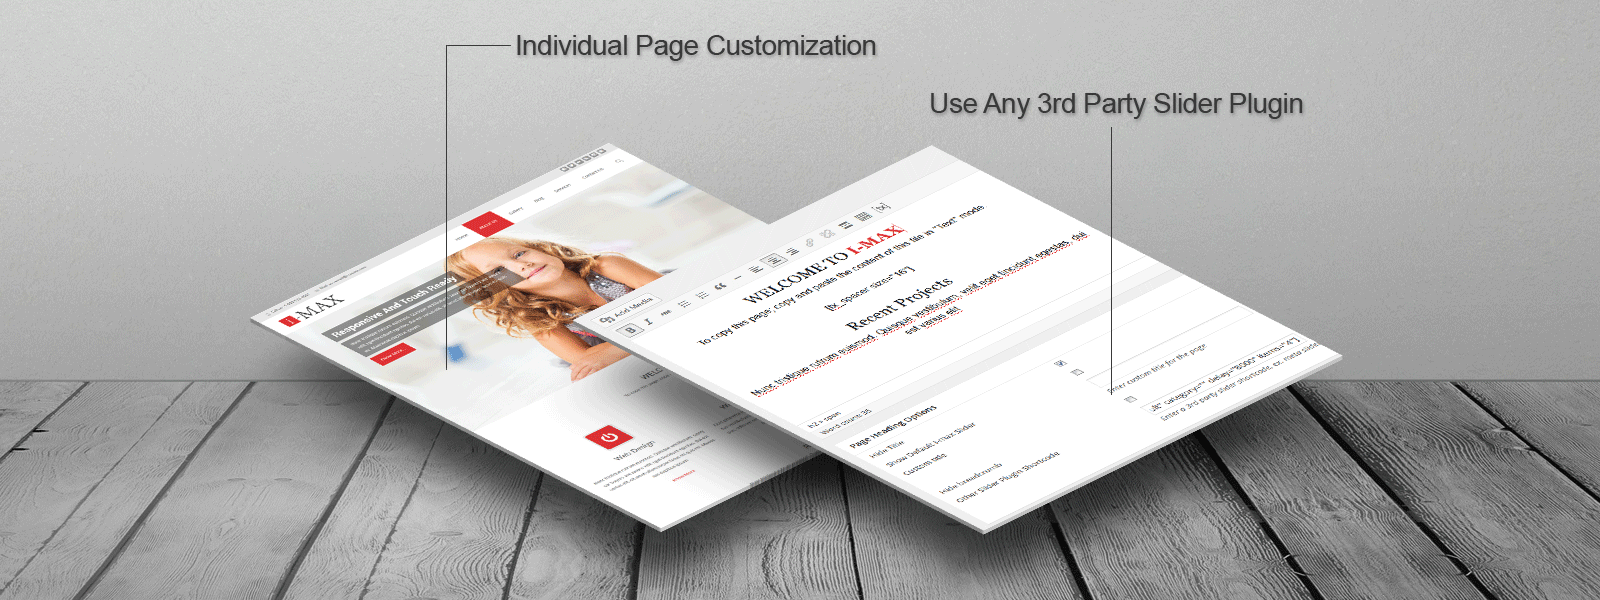 Customize your pages